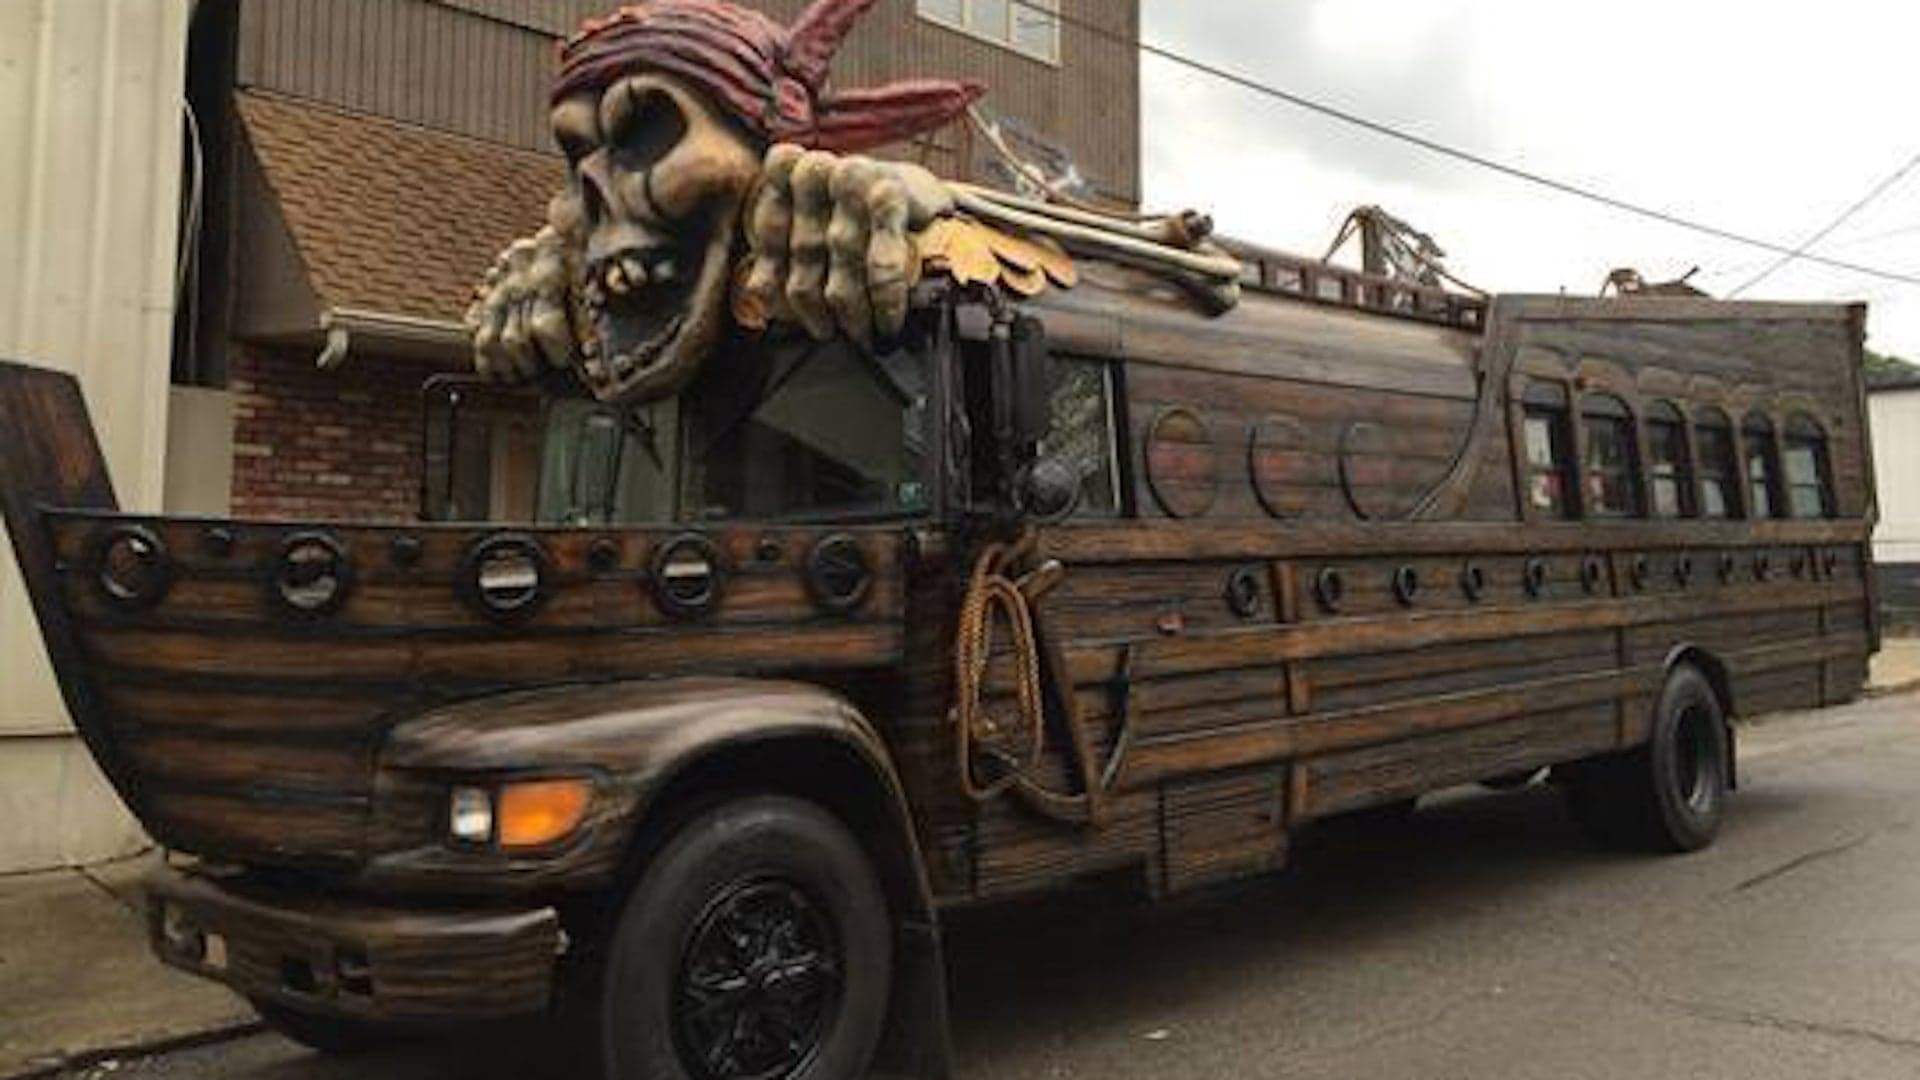 Someone Turned a School Bus Into This Surprisingly Excellent $50,000 Pirate Ship